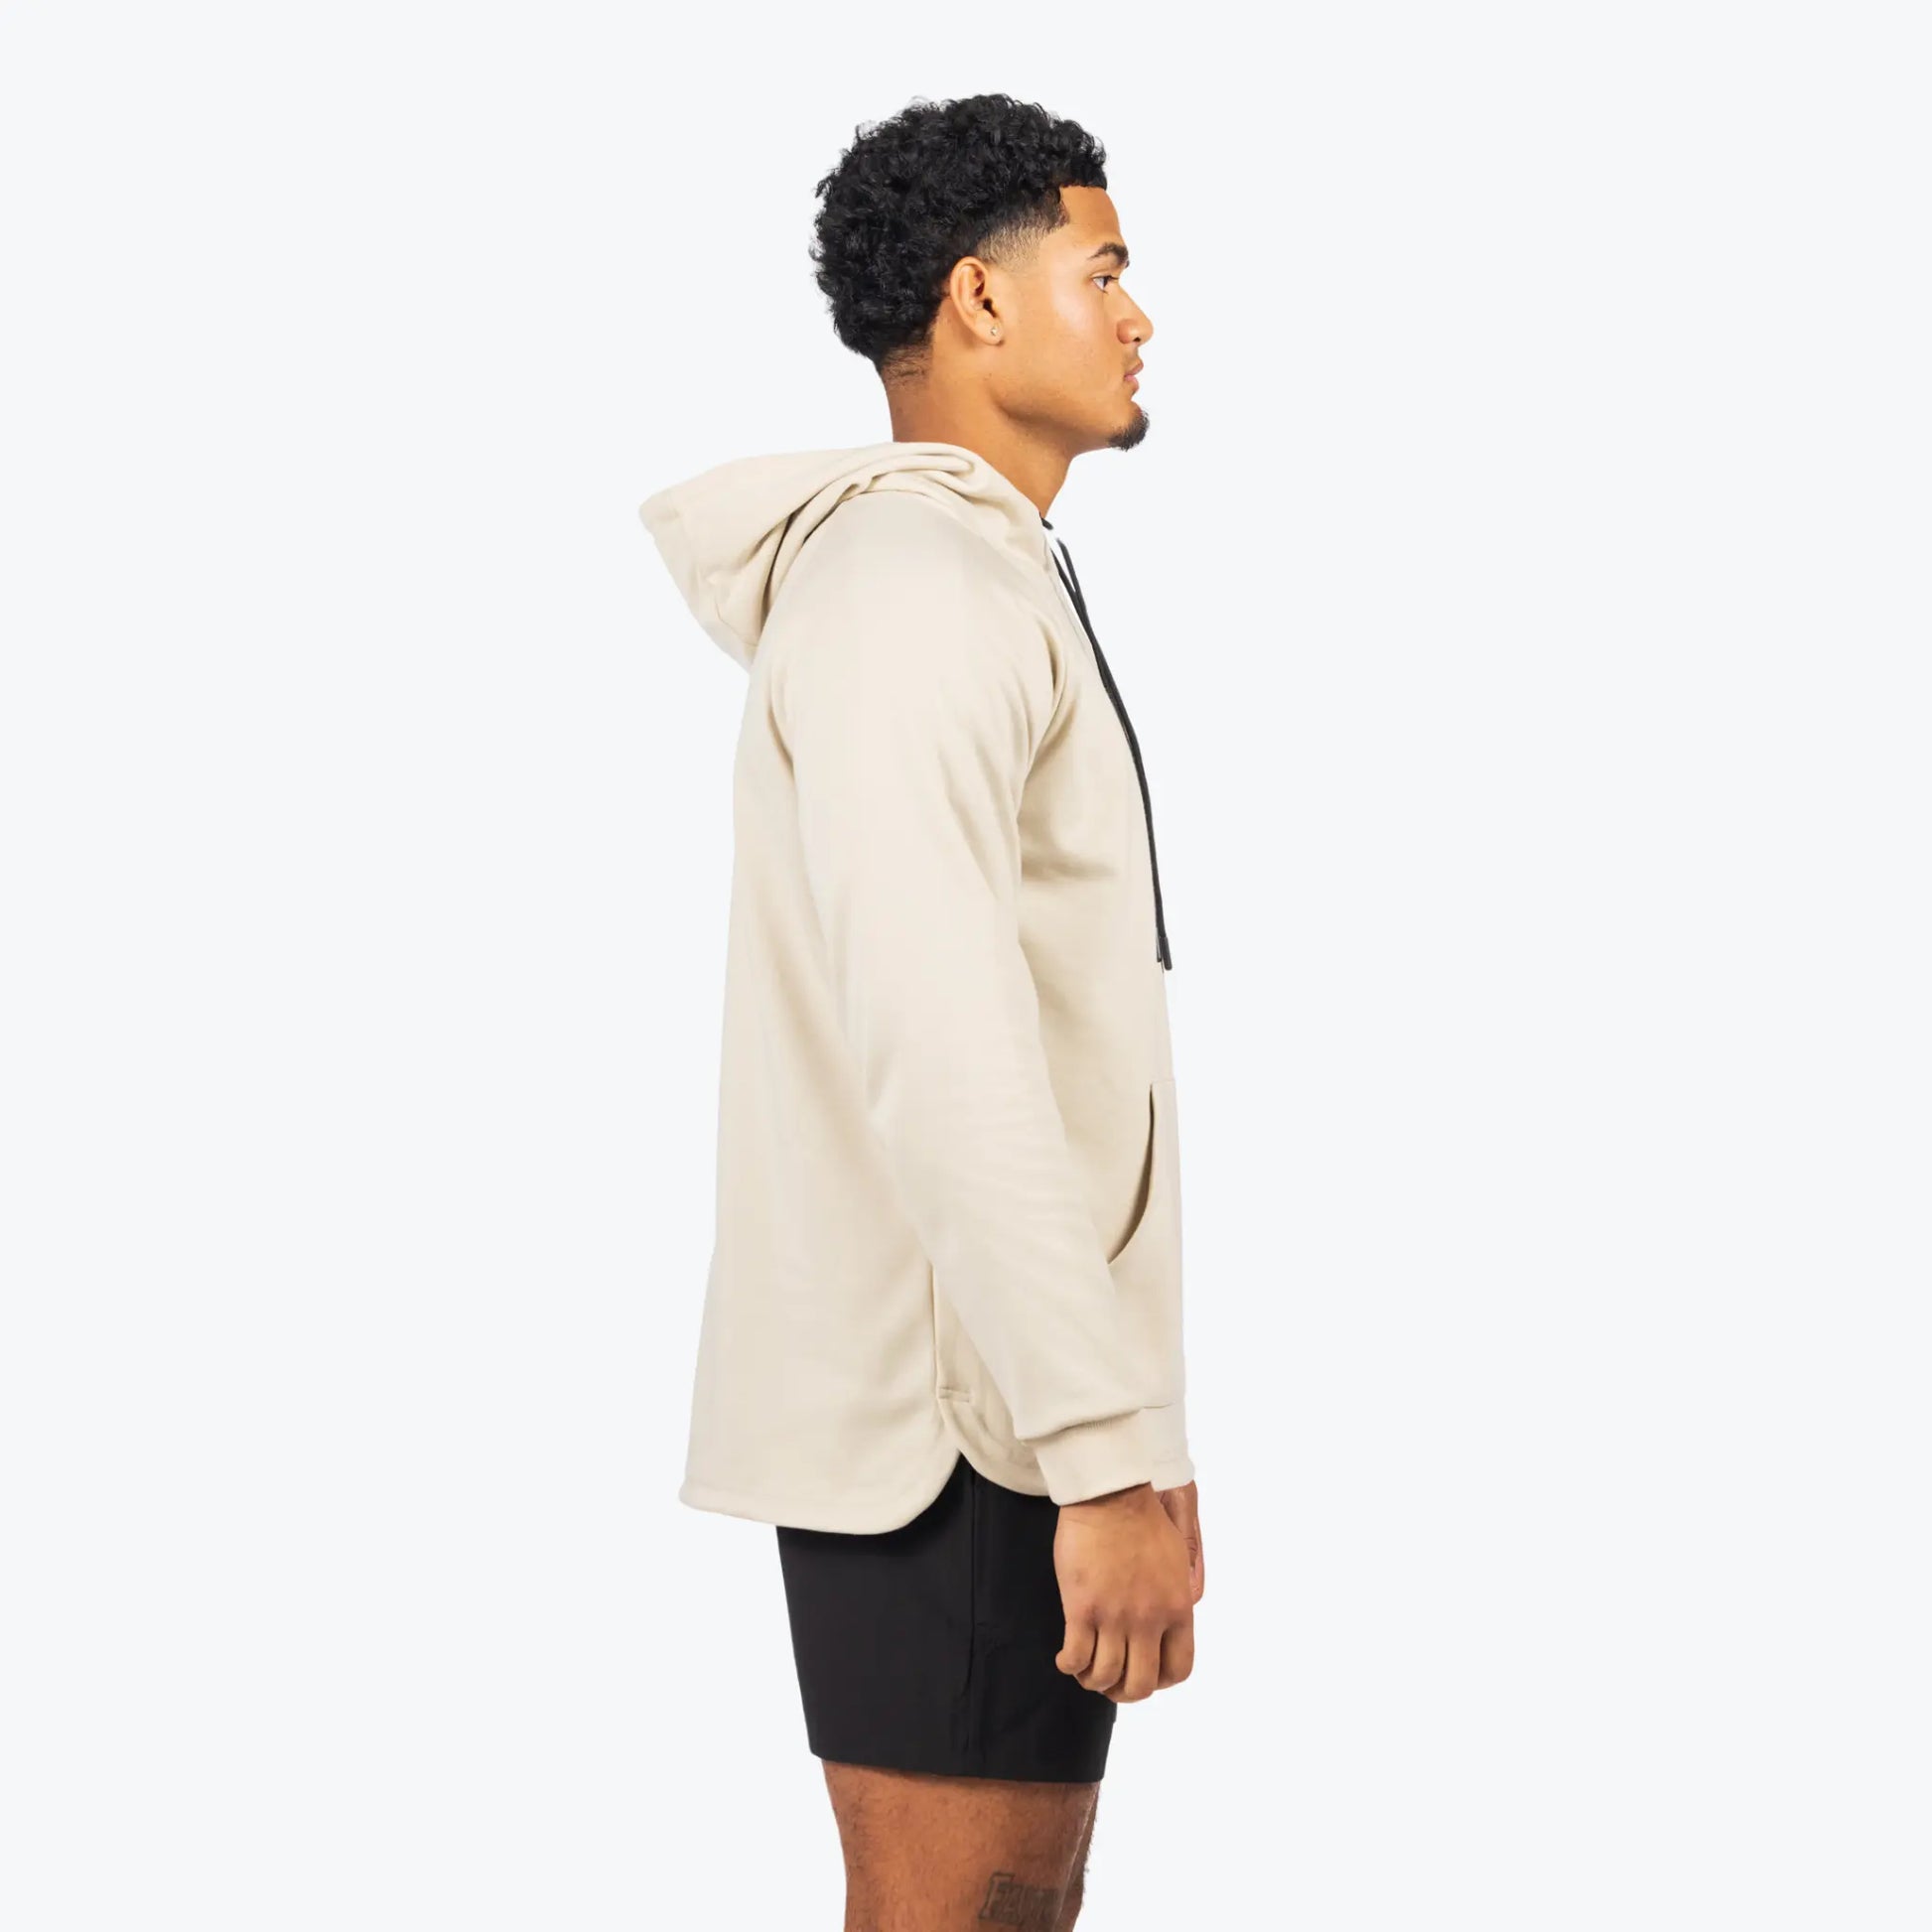 The uploaded image features a side view of a model wearing a professional baseball training hoodie with long sleeves. The hoodie is cream-colored, with a drawstring hood and the "TATER" logo printed along the sleeve, pairing well with the black athletic shorts the model is wearing. The attire highlights a combination of comfort, style, and functionality, suitable for both training and casual wear within a baseball lifestyle context.